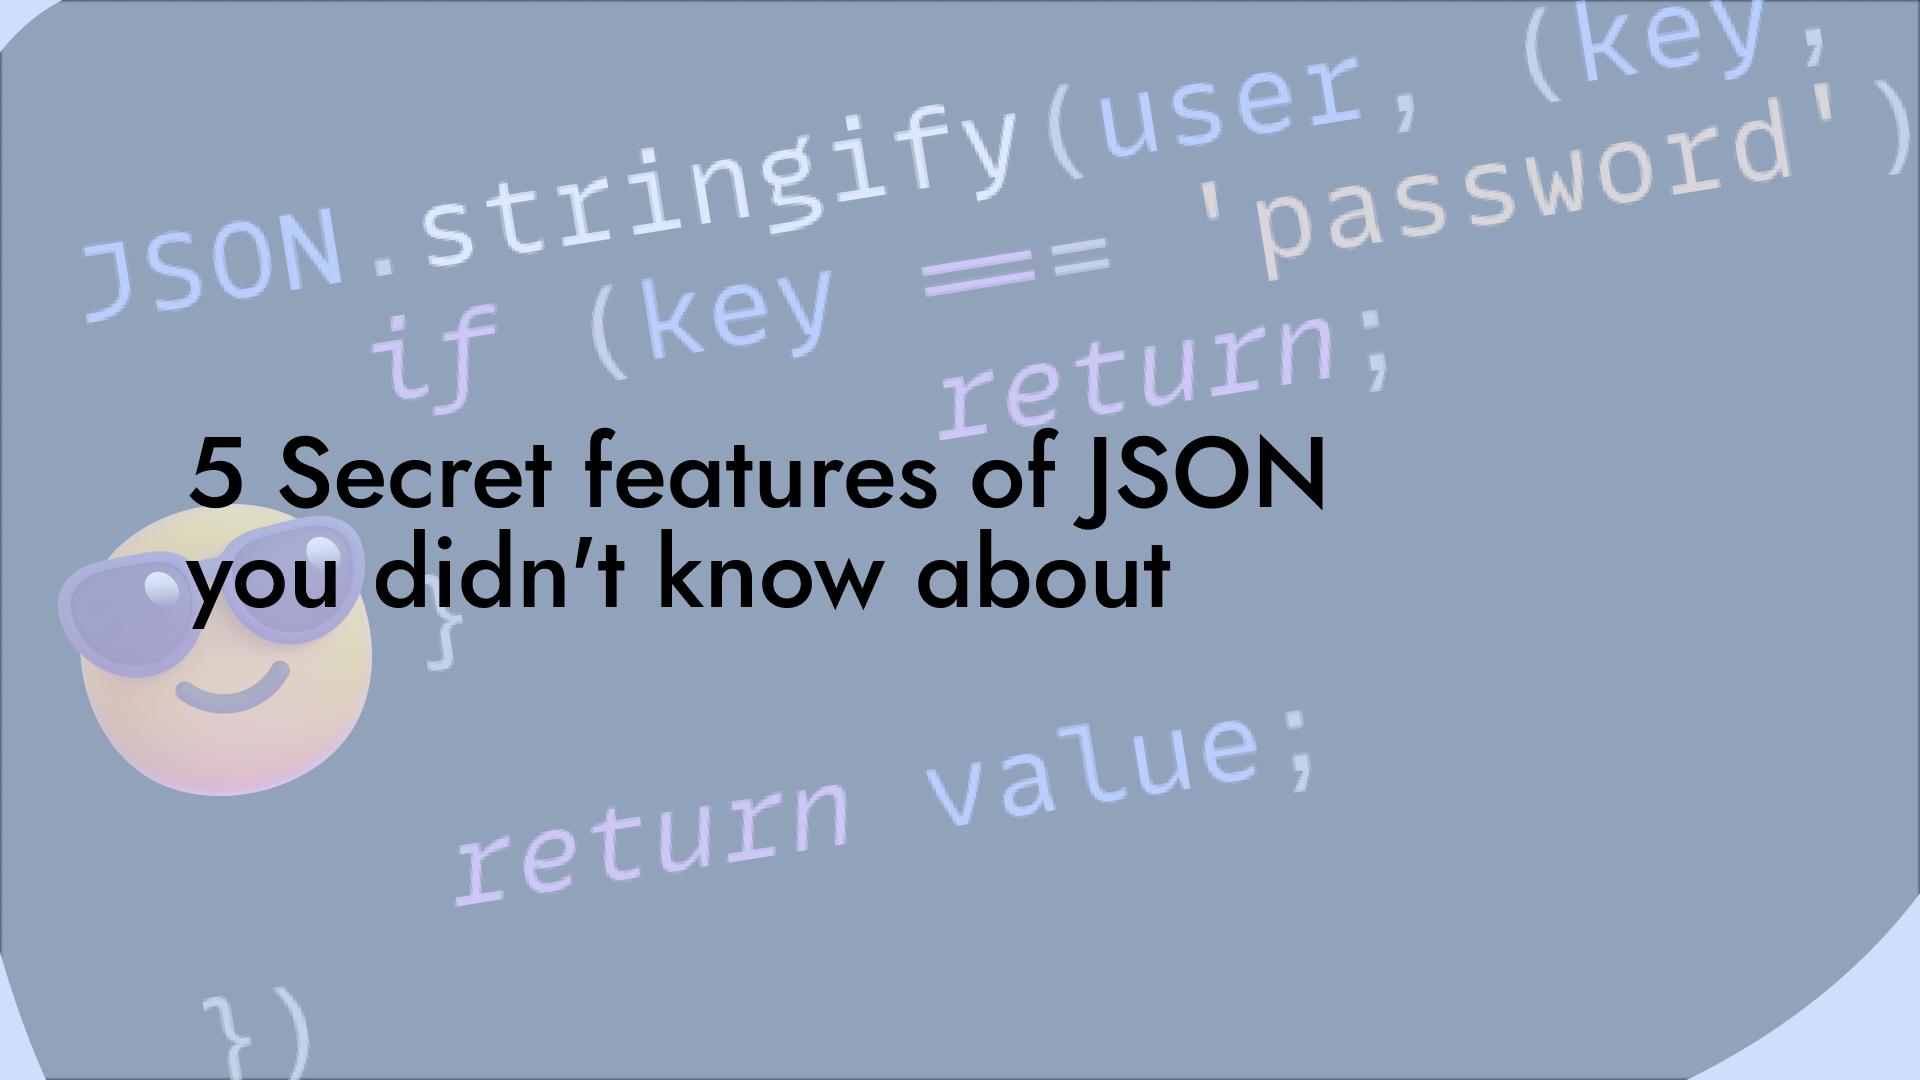 5 Secret features of JSON you didn't know about 🤯